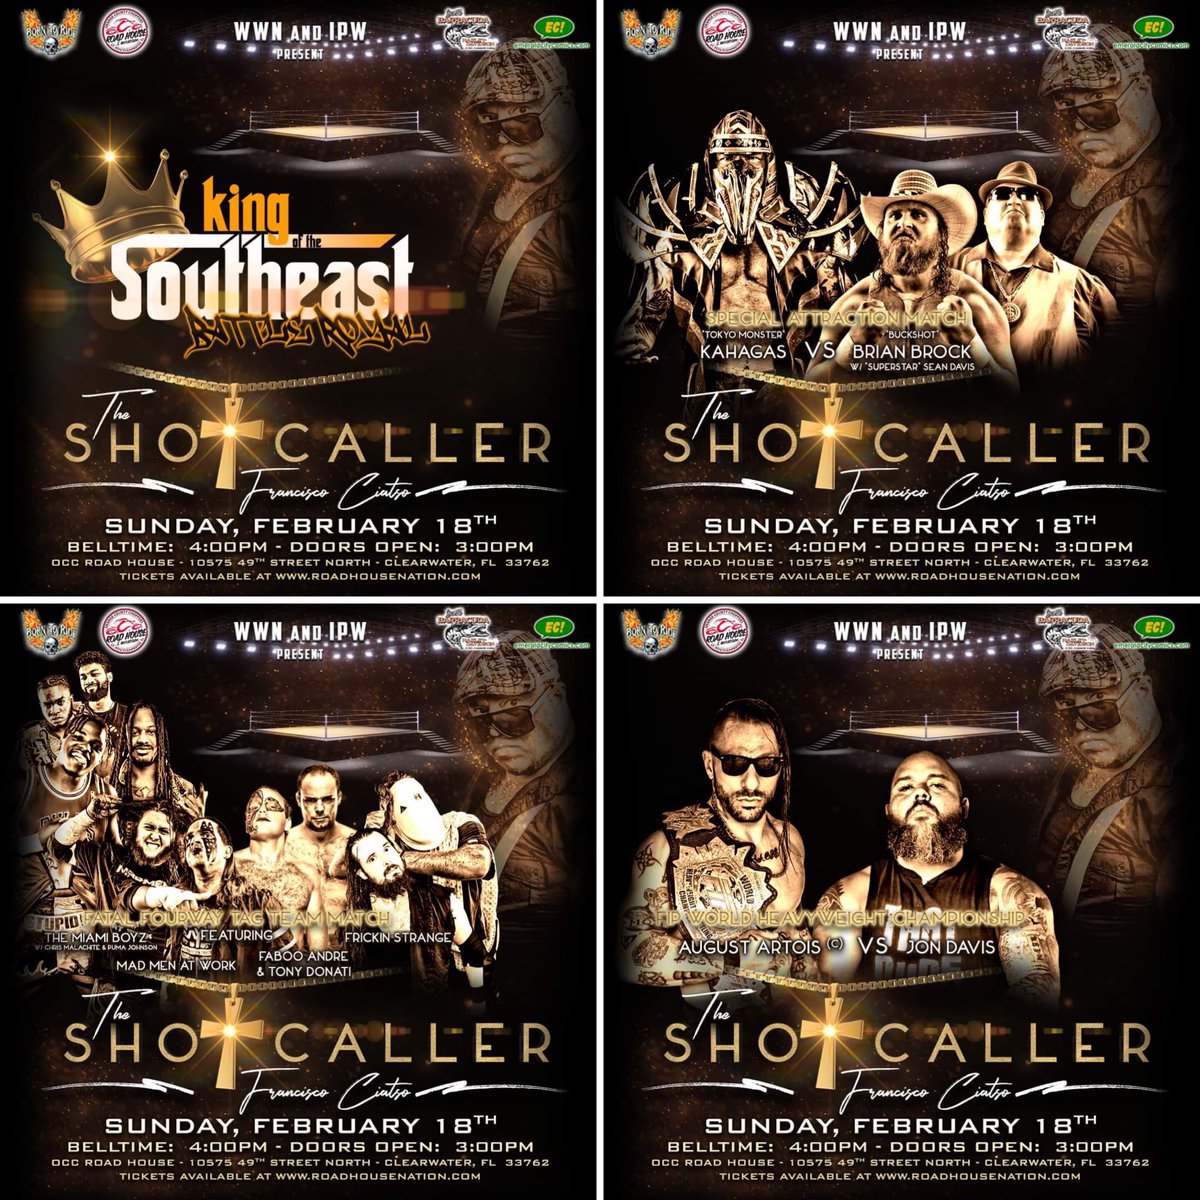 These 8 matches just announced for WWN and IPW presents The Shotcaller, a tribute to Francisco Ciatso! This is going to be one you don’t want to miss! Tickets available now at RoadhouseNation.com